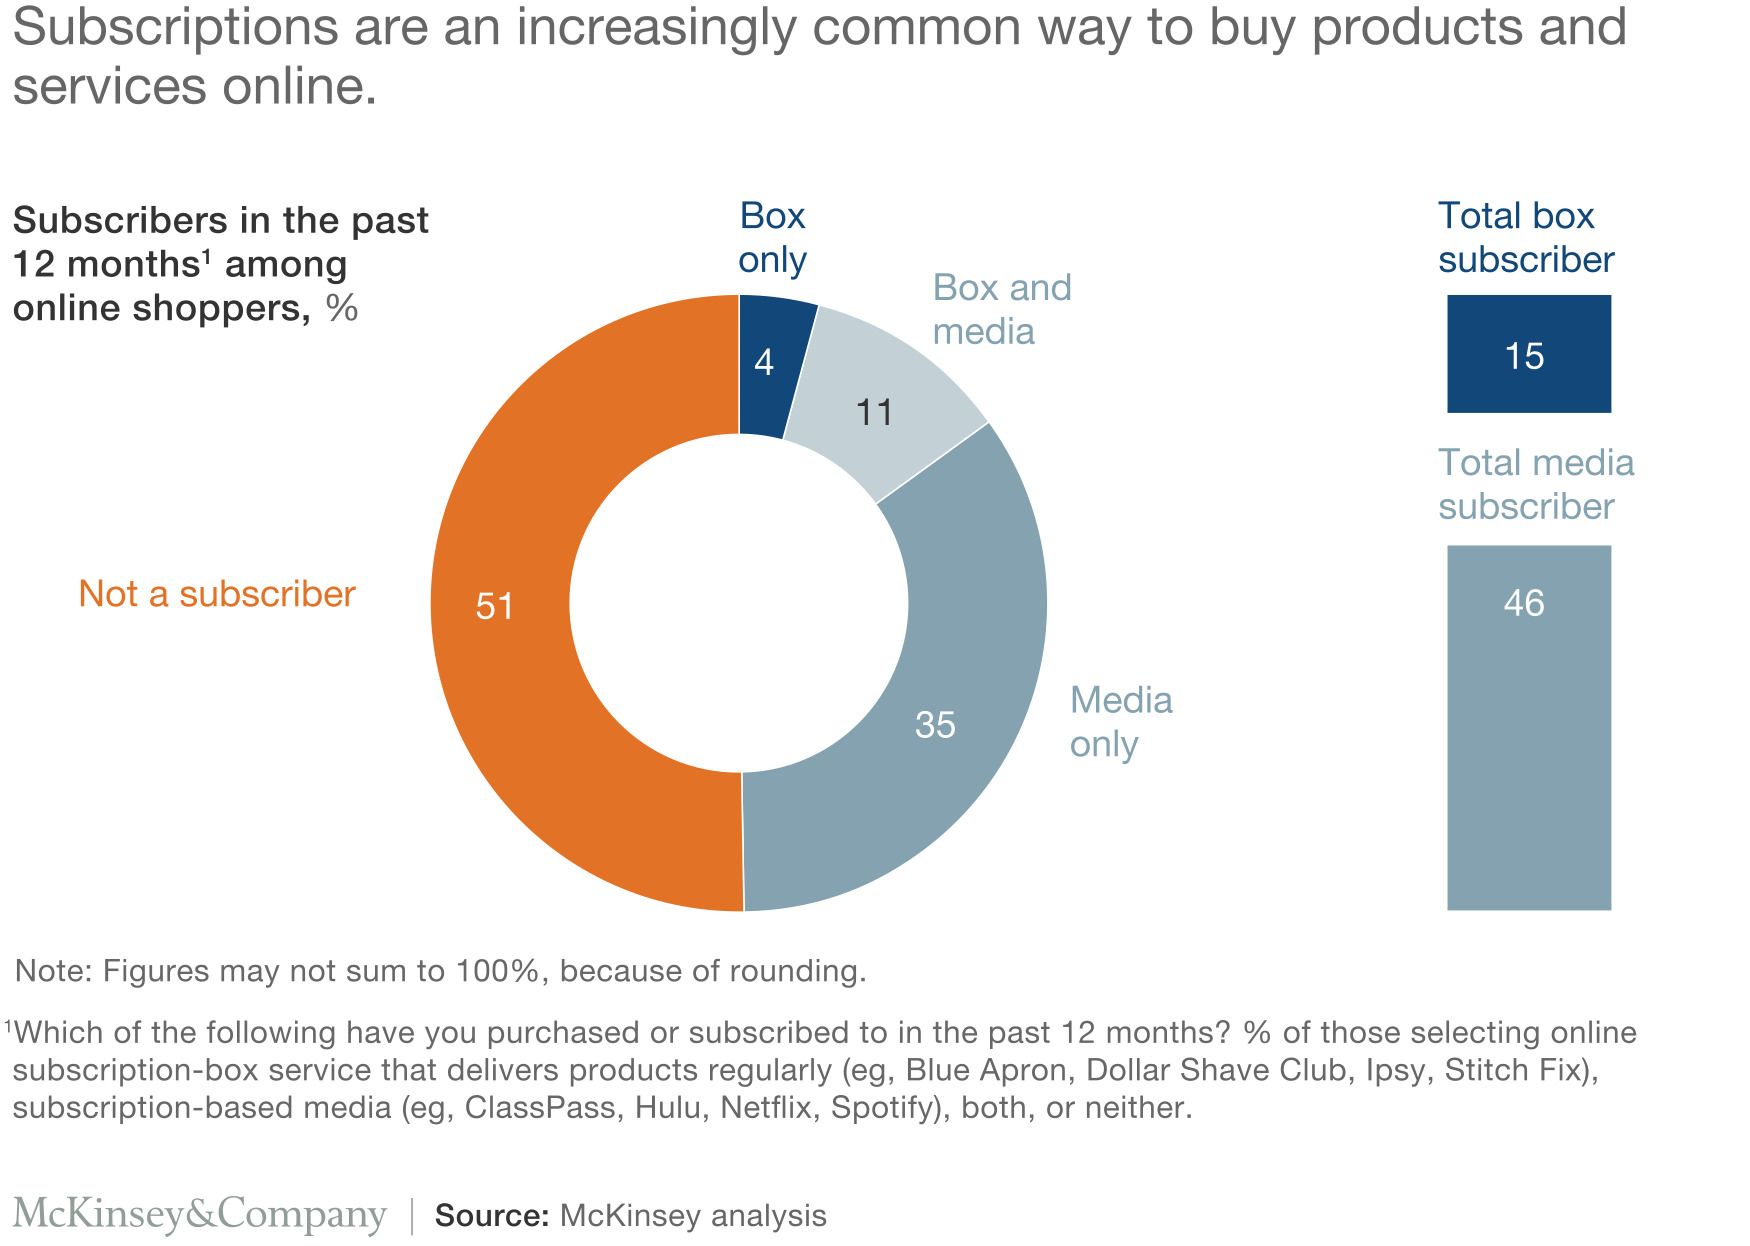 Subscriptions are an increasingly common way to buy products and services online